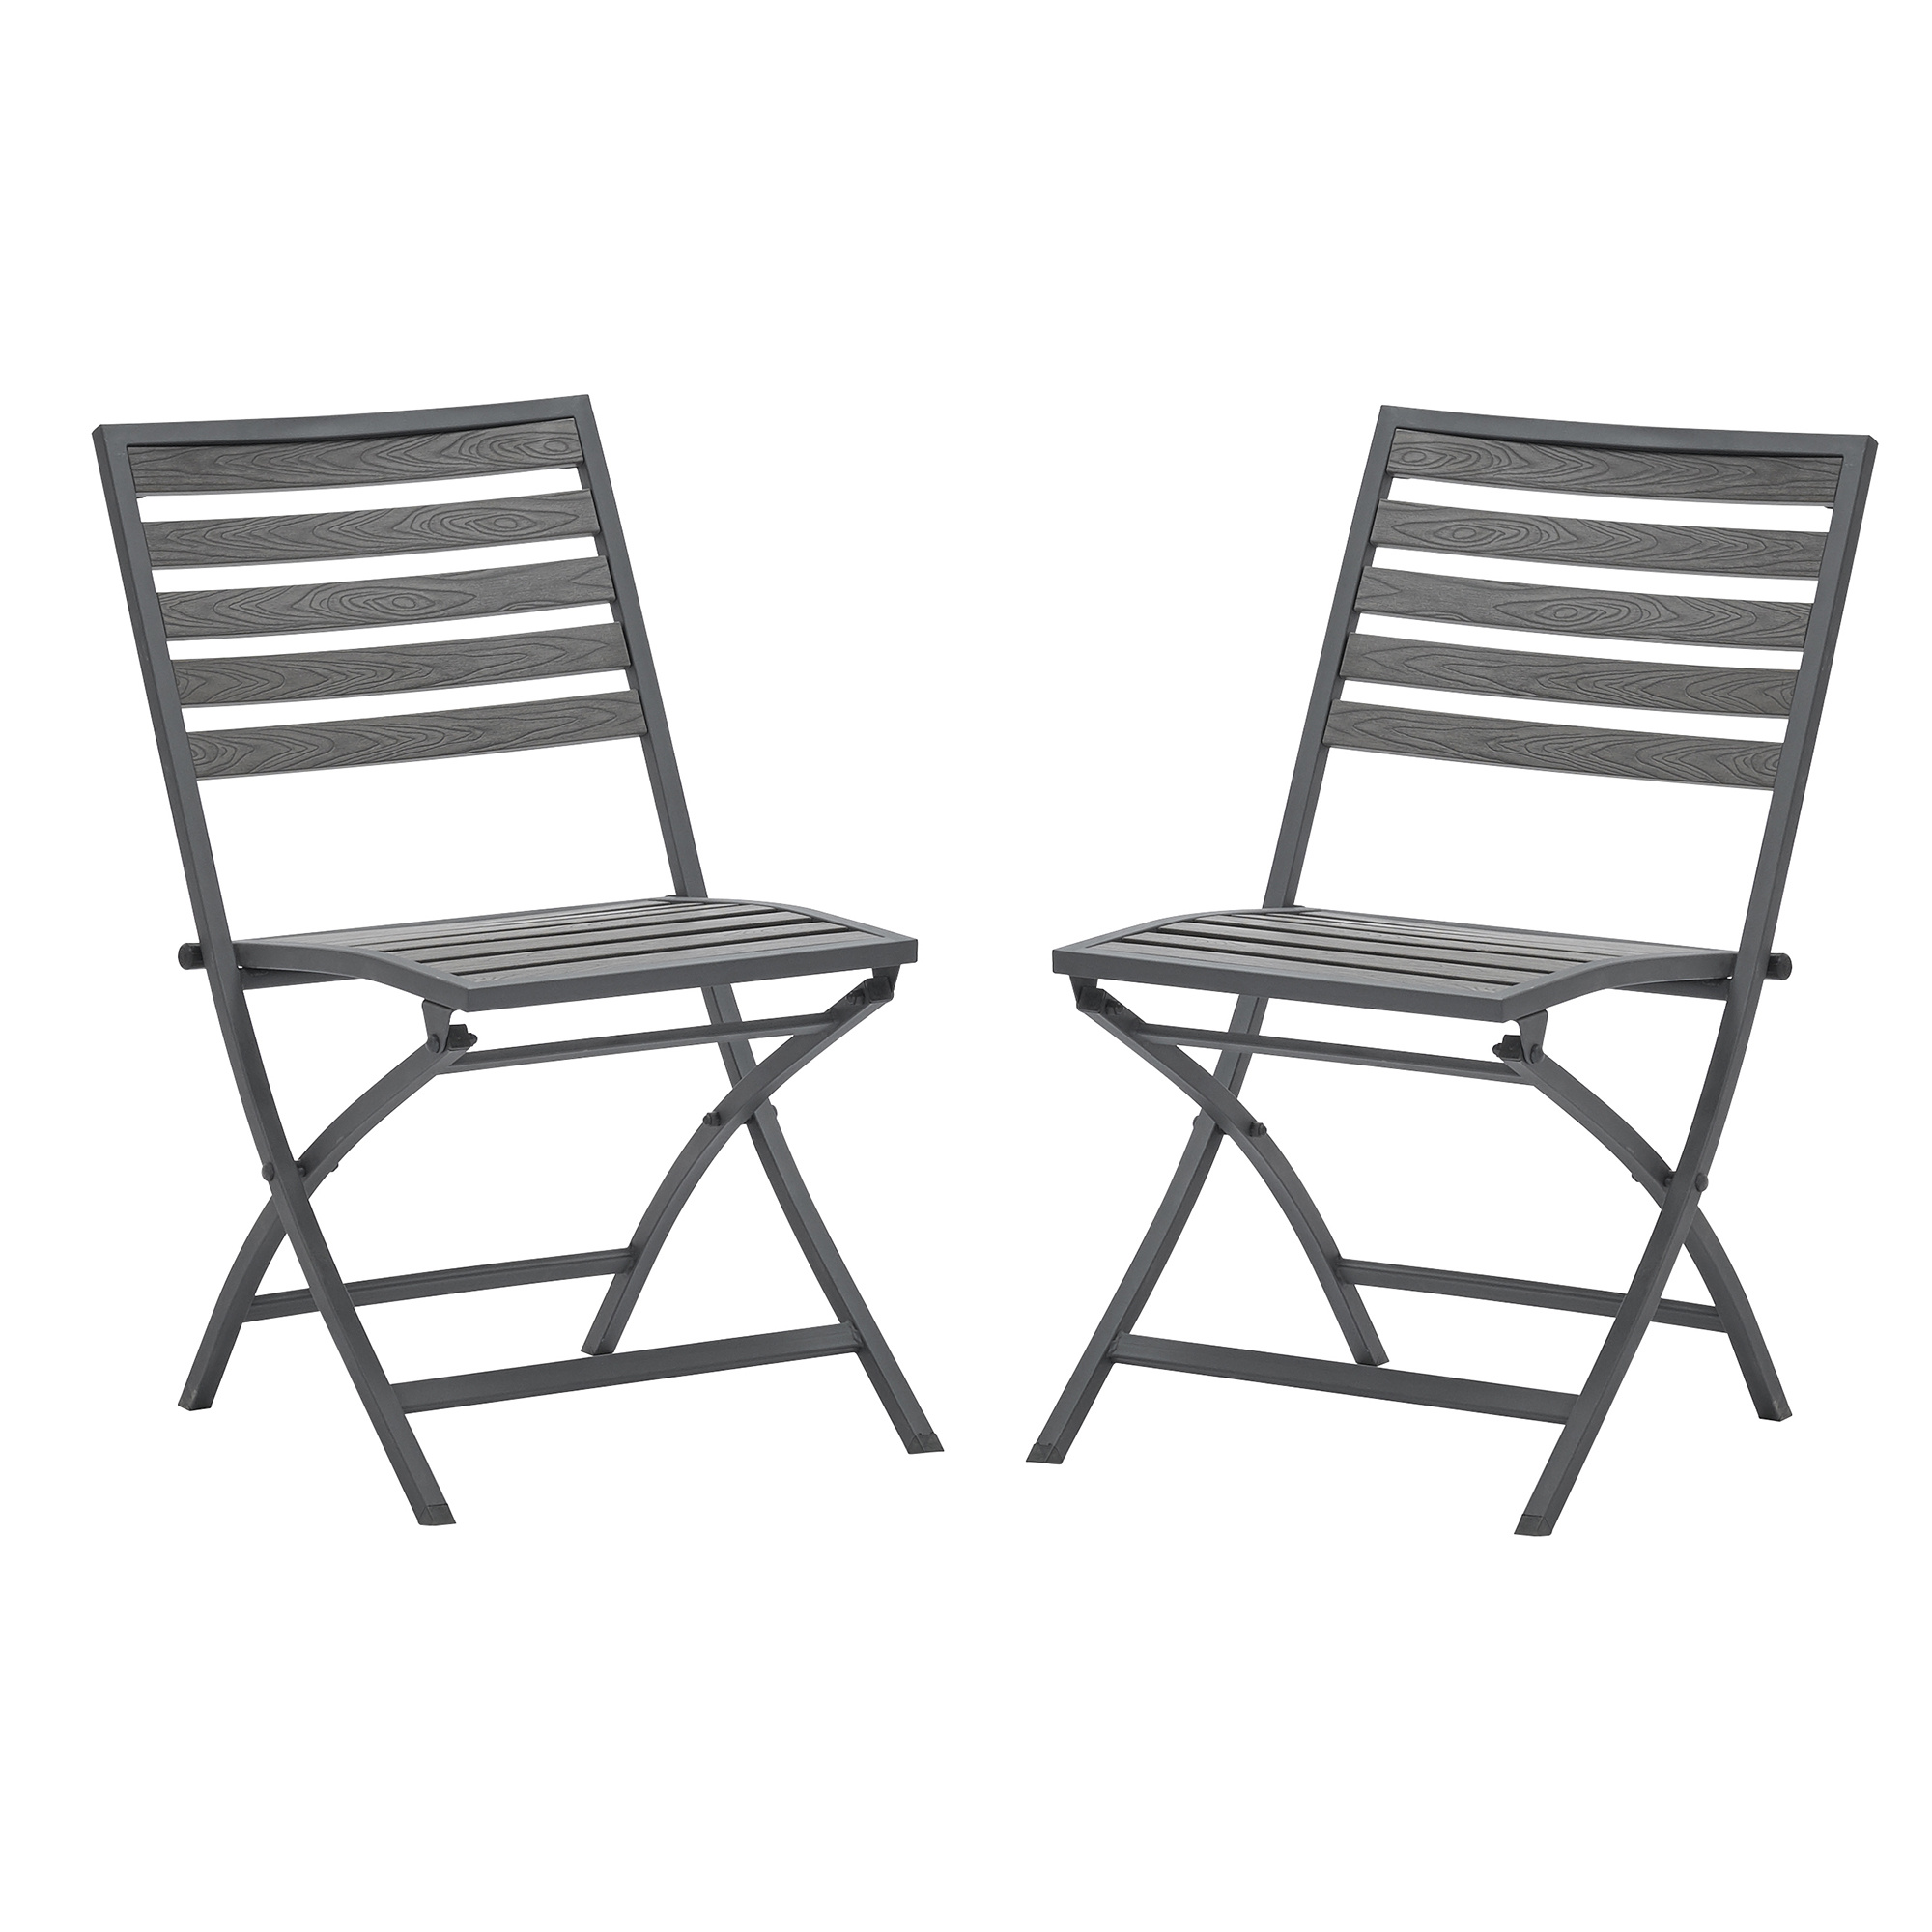 Modern Rattan Coffee Chair Table Set 3 PCS, Aukfa Modern Rocking Bistro Set Rattan Chair, Outdoor Furniture Rattan Chair, Garden Set（Two Chair + One Table） - image 5 of 10